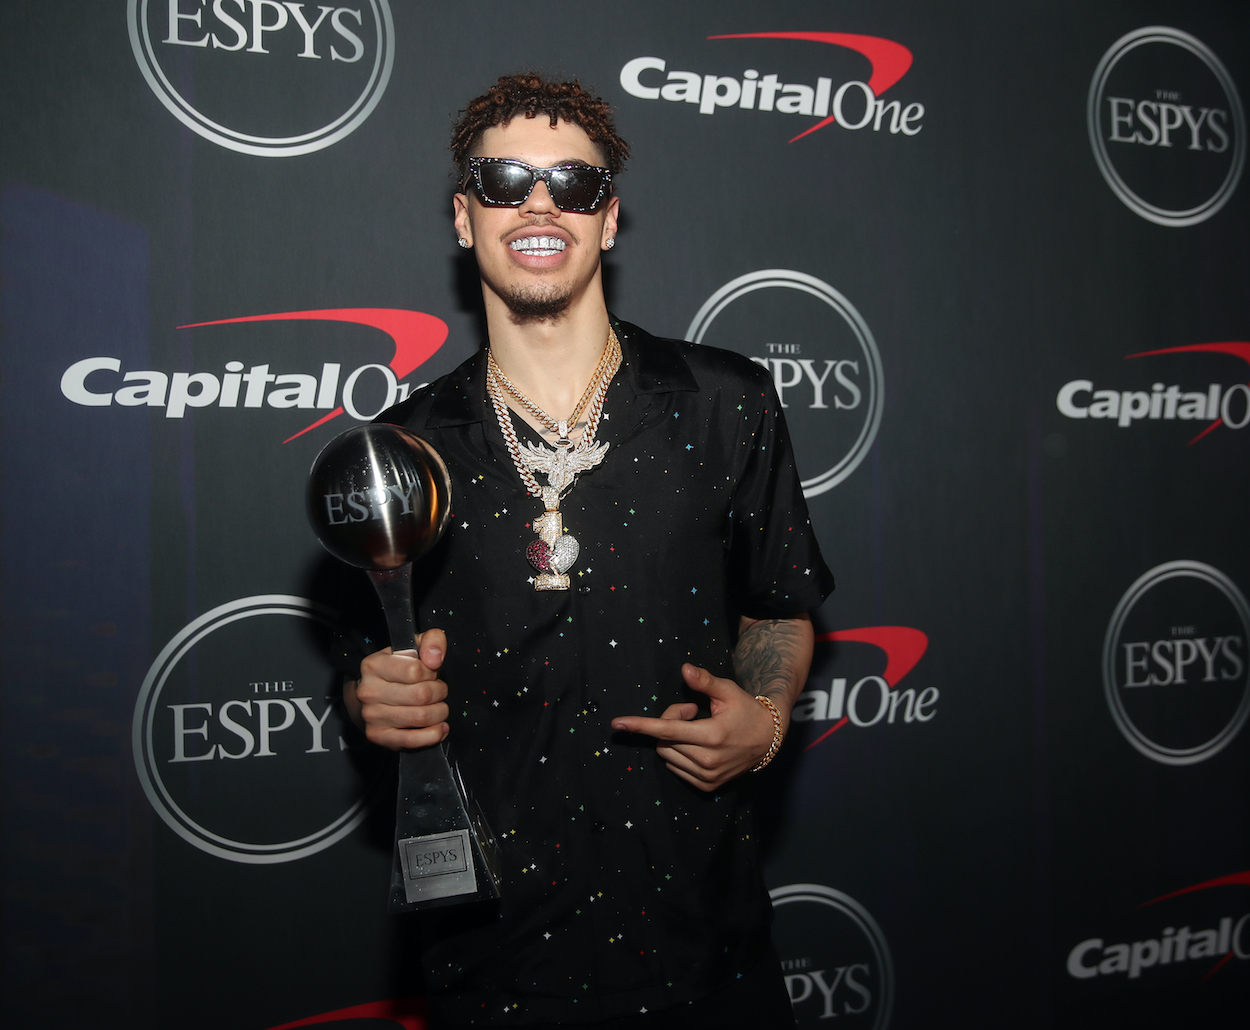 LaMelo Ball and some of the world's best athletes and biggest stars join host Anthony Mackie for "The 2021 ESPYS Presented by Capital One." The star-studded event airs live on ABC Saturday, July 10 from 8:00-11:00 p.m. EDT from The Rooftop at Pier 17 at the Seaport in New York City.